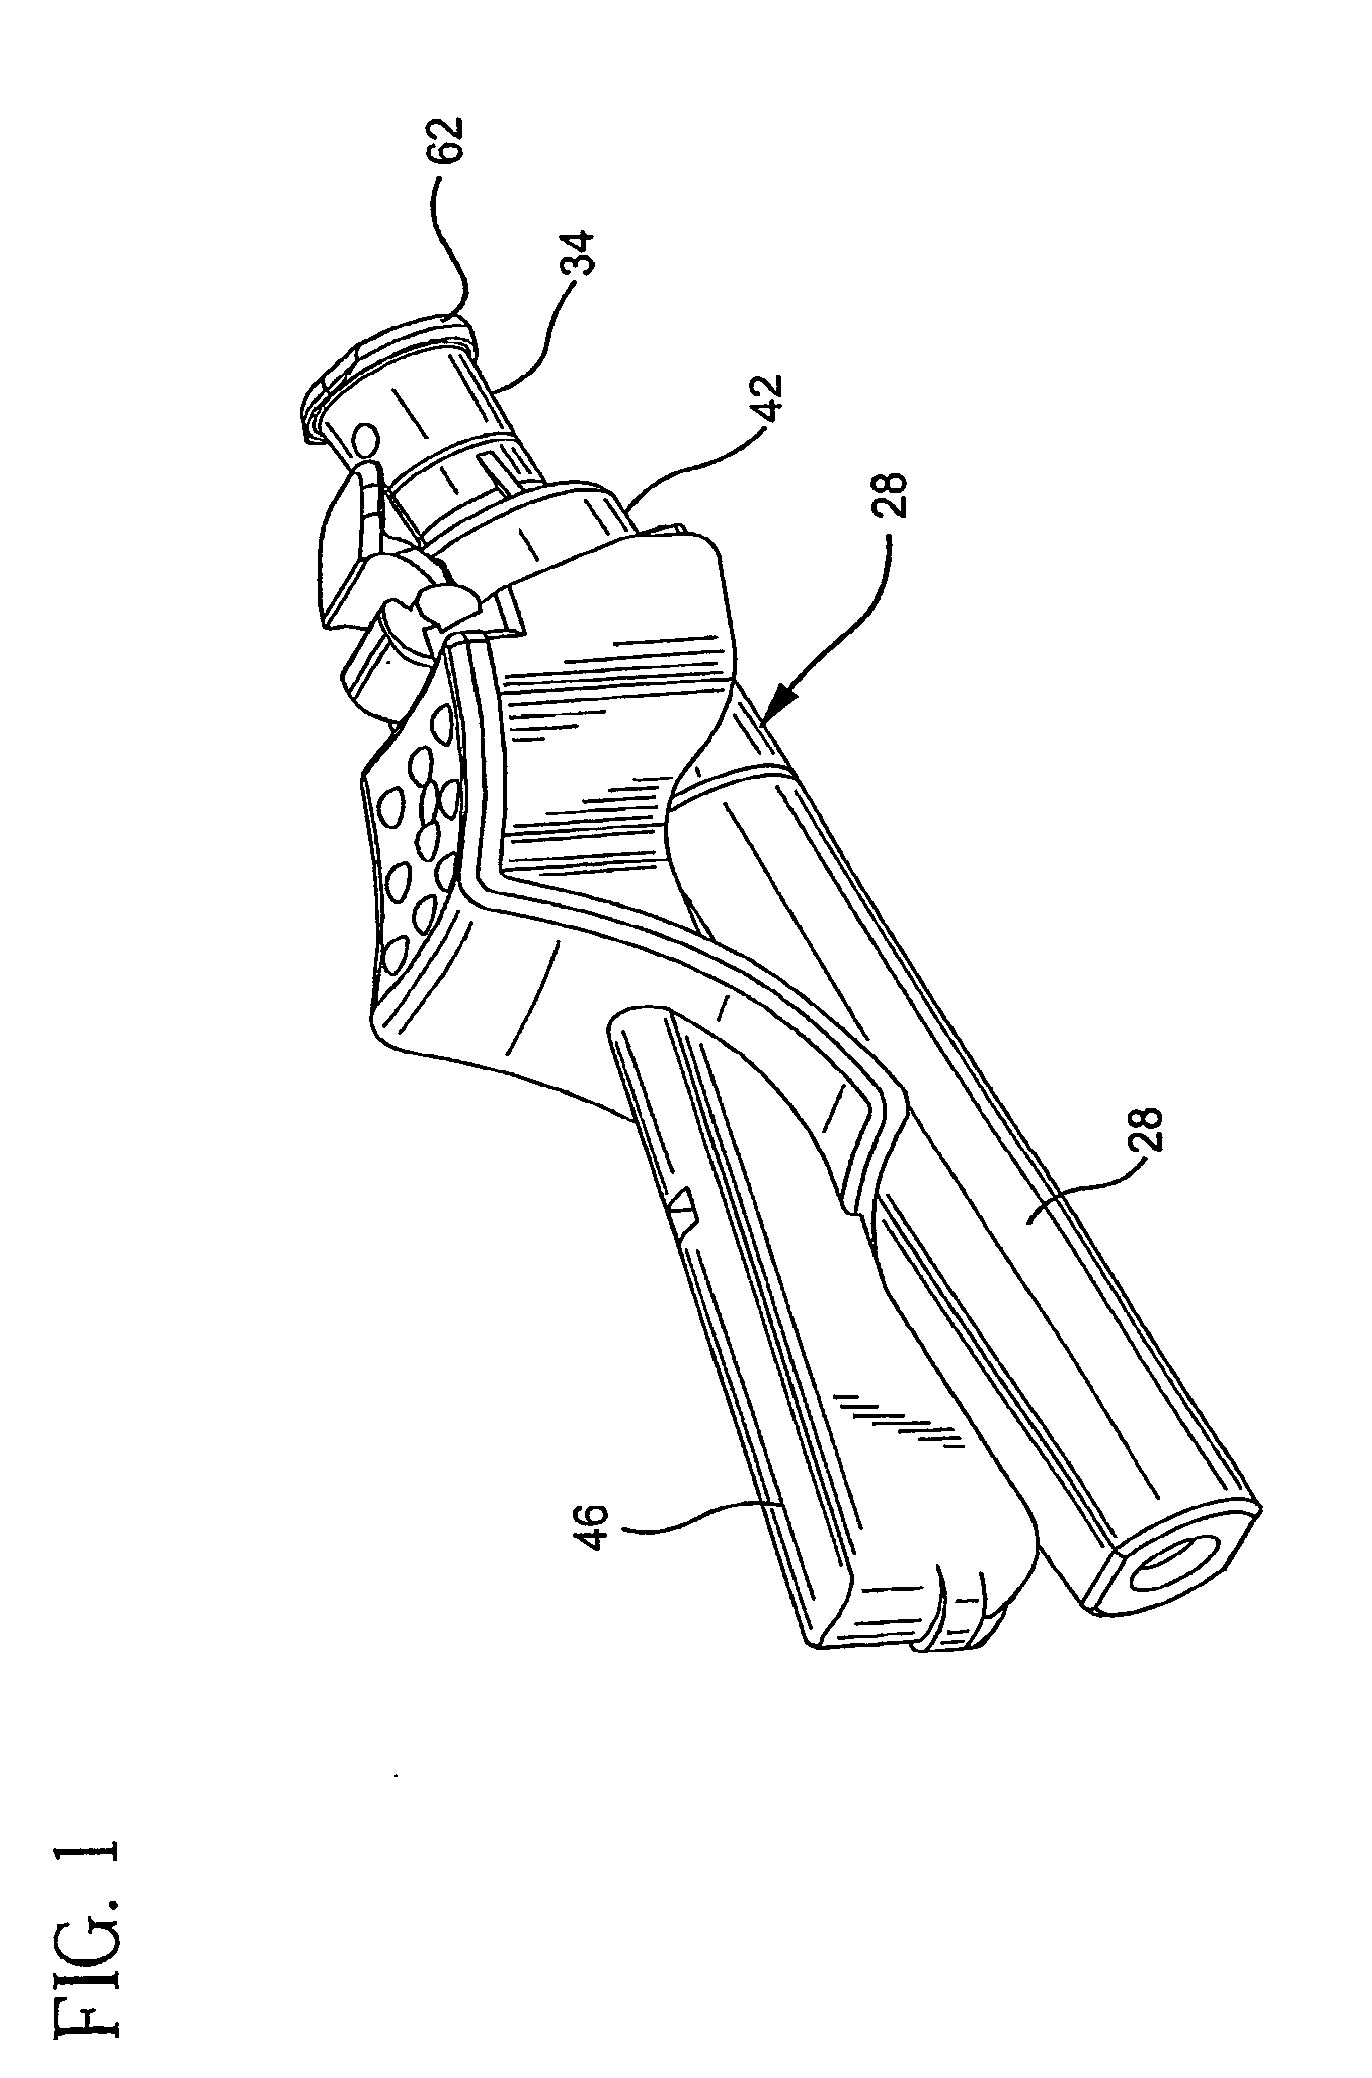 Luer connector assembly